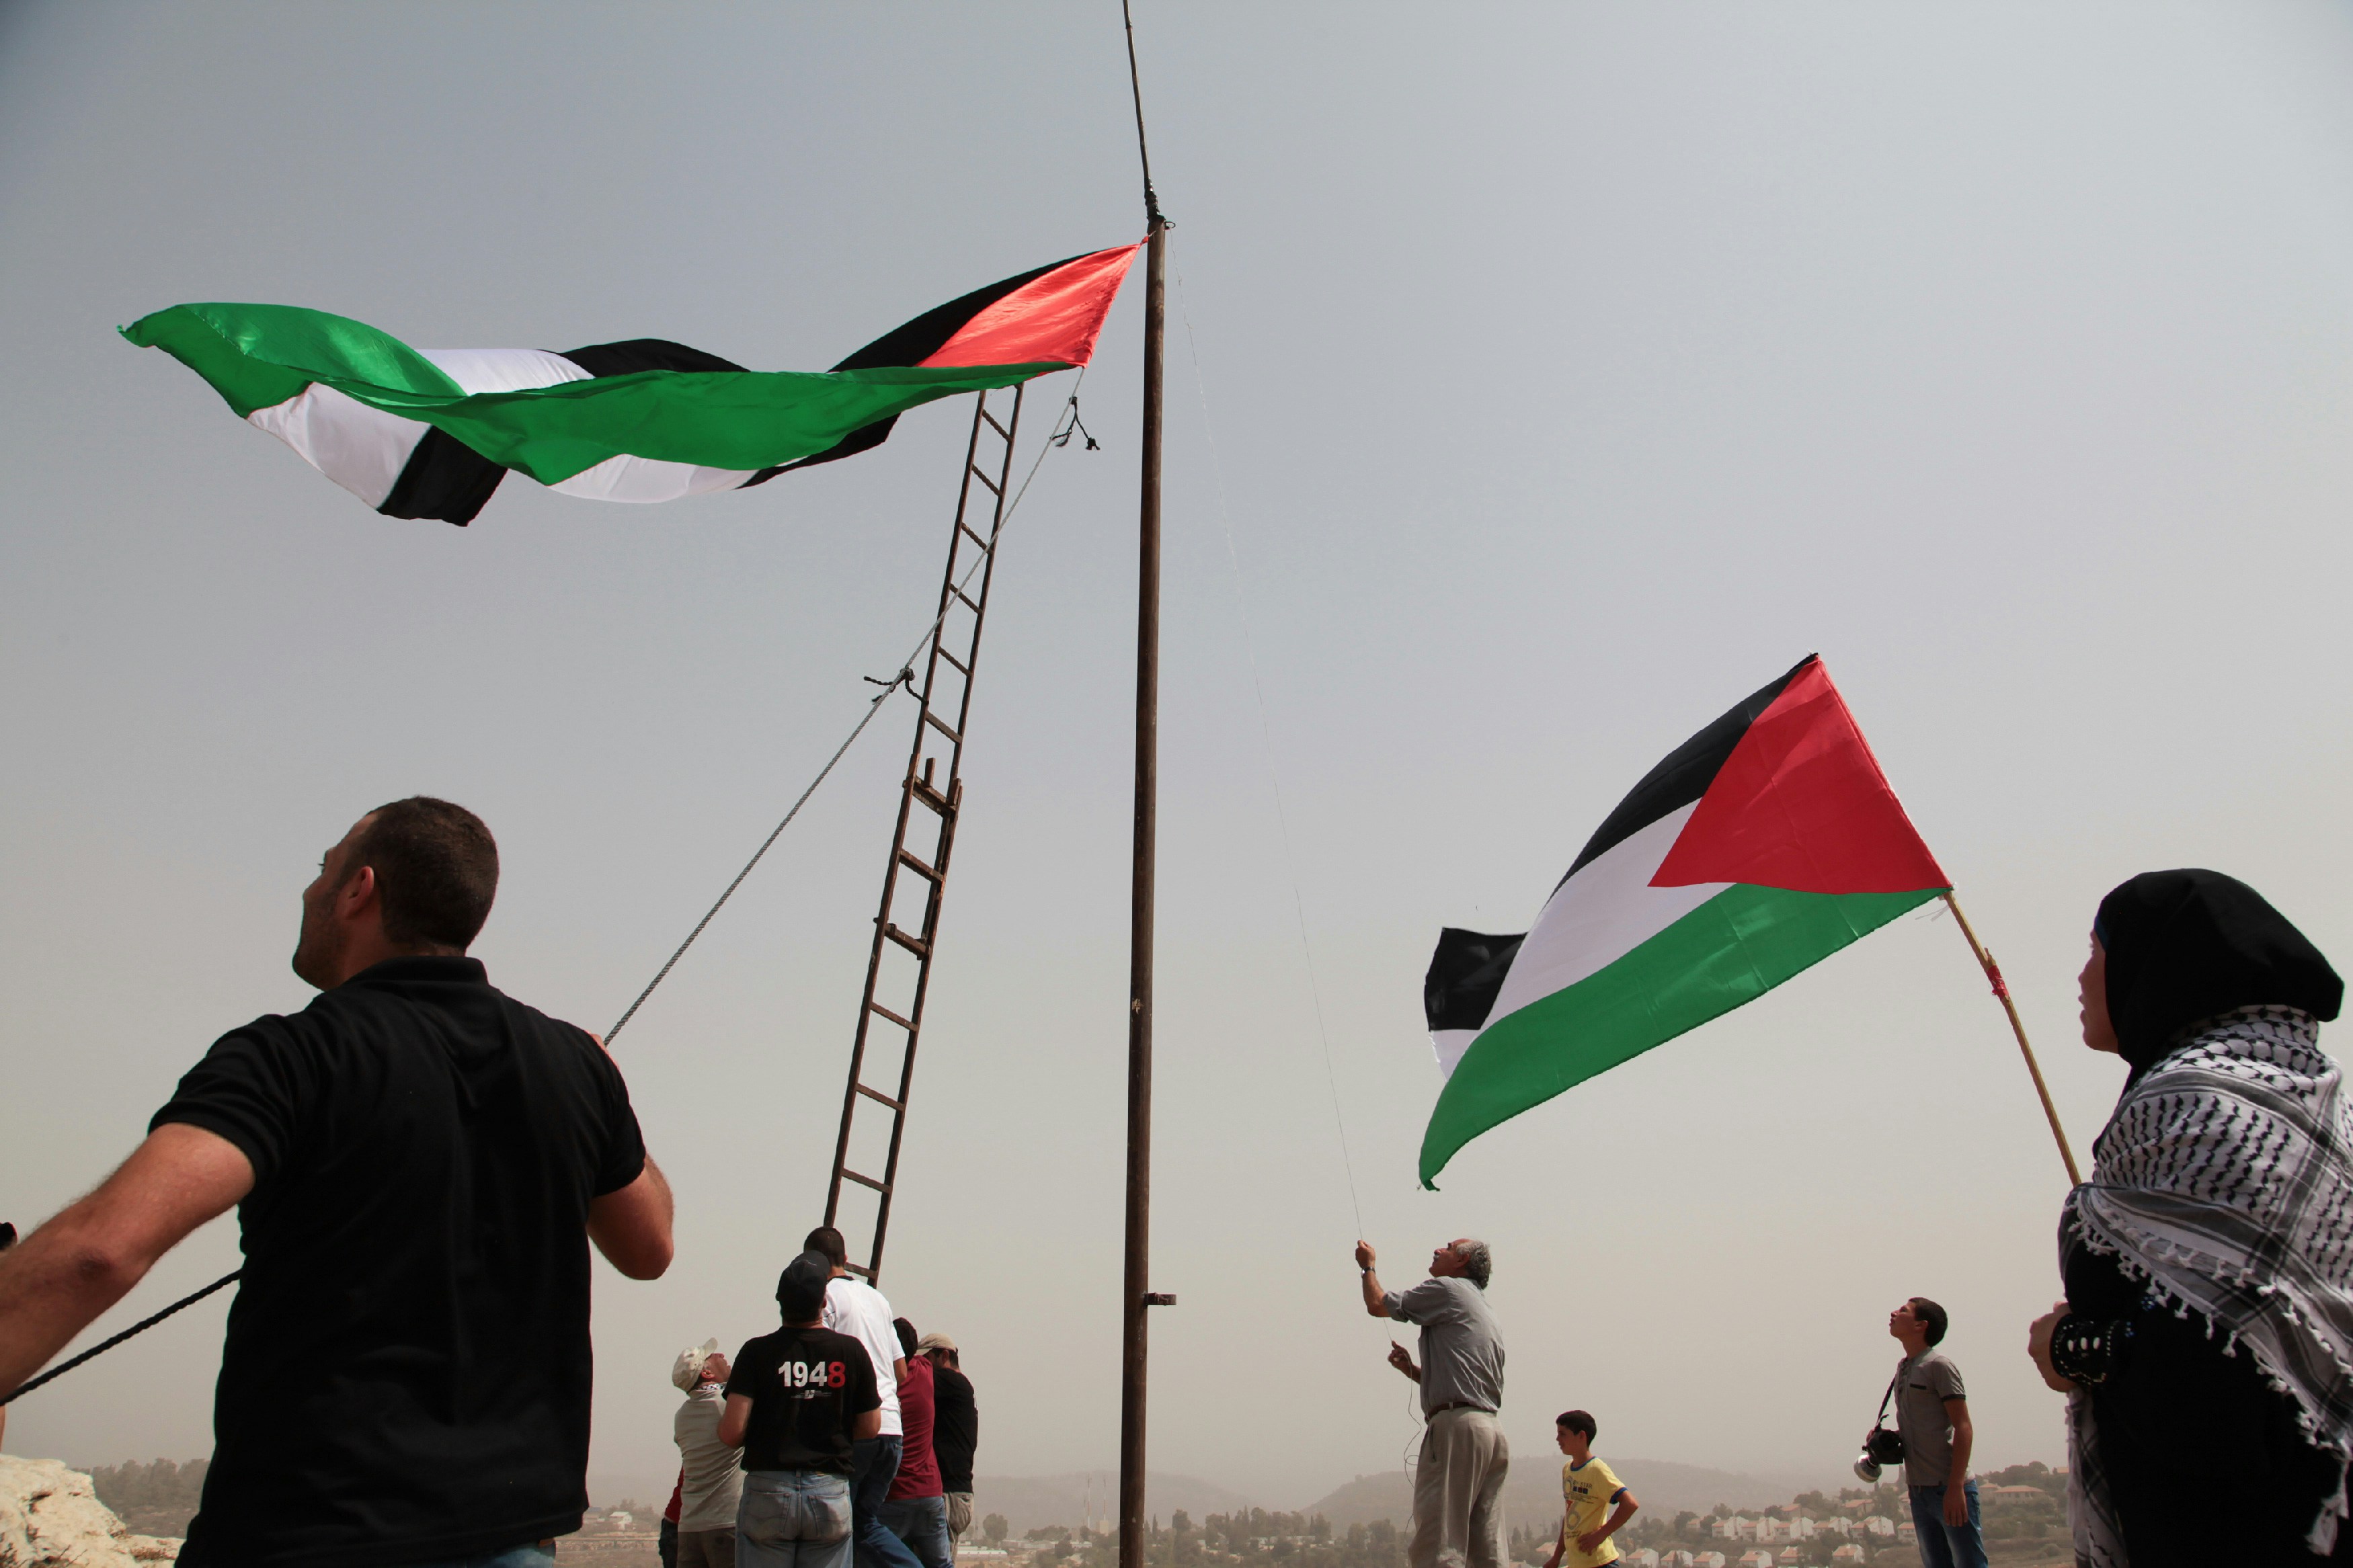 Palestinian protesters are raising a huge Palestine flag on flagpole in An Nabi Saleh on Sep 11, 2015. (Photo by Mohammad Alhaj/NurPhoto) (Photo by NurPhoto/NurPhoto via Getty Images)